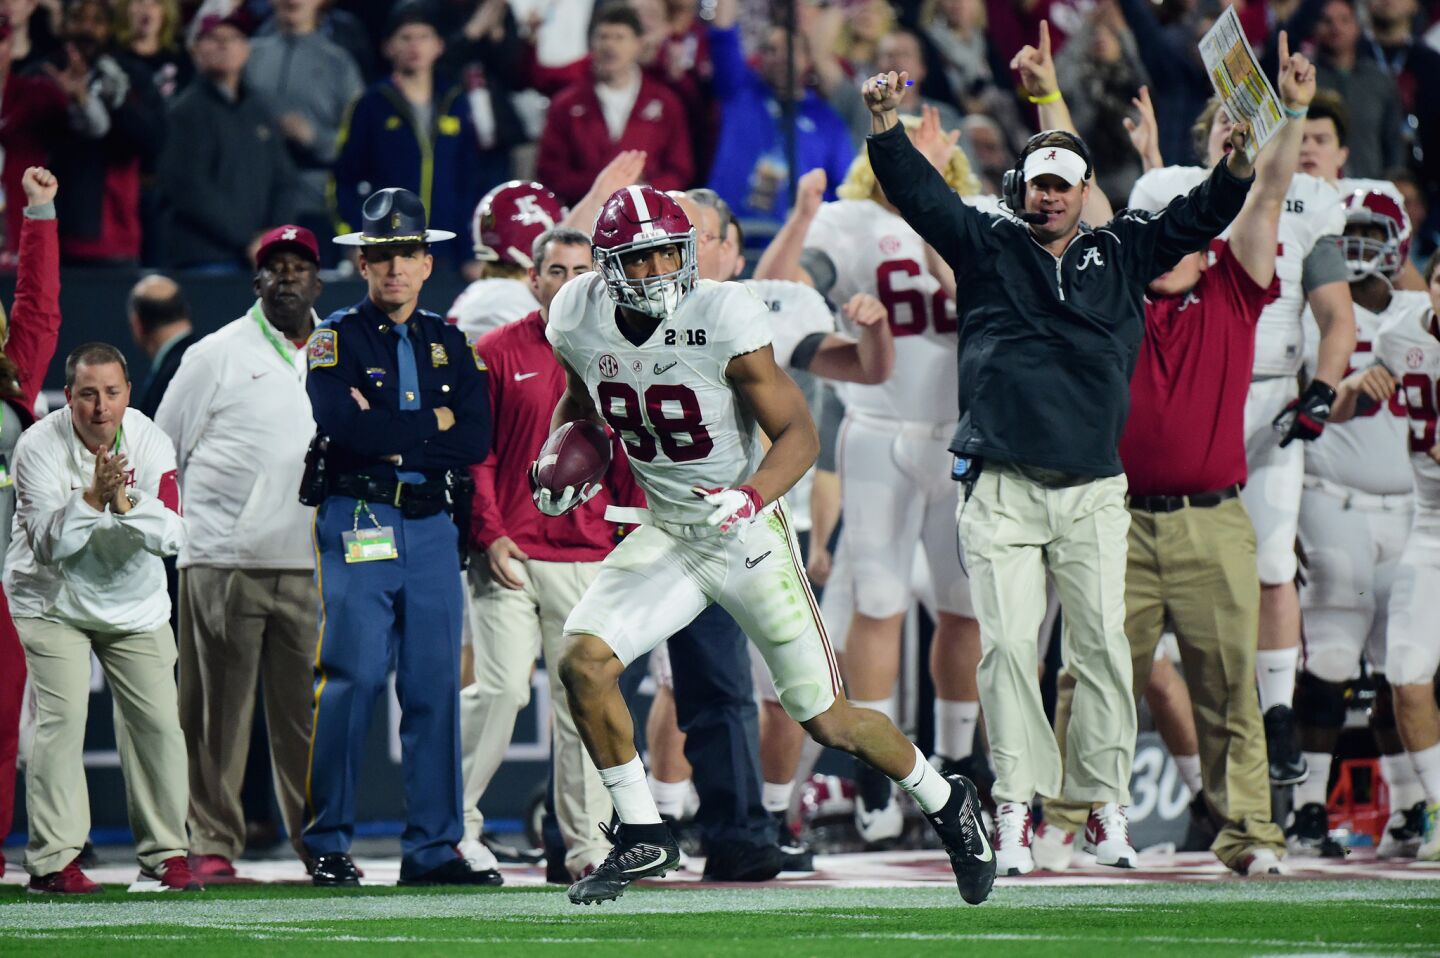 Alabama tight end O.J. Howard catches a 53-yard touchdown in the third quarter as offensive coordinator Lane Kiffin celebrates.